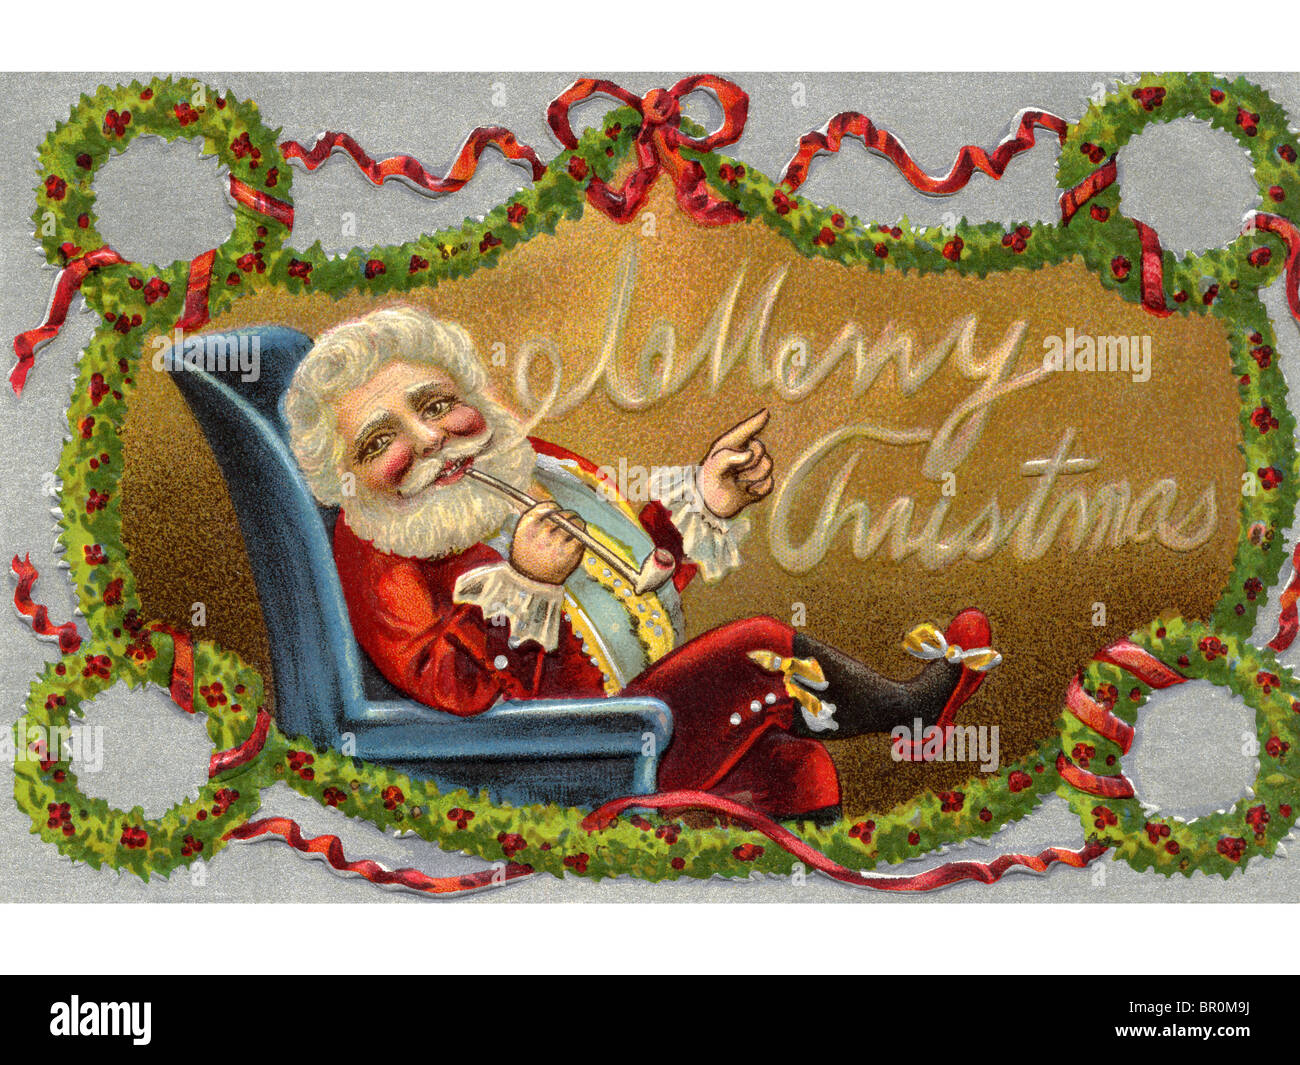 Vintage Christmas card of Santa Claus sitting in a chair and wreaths Stock Photo